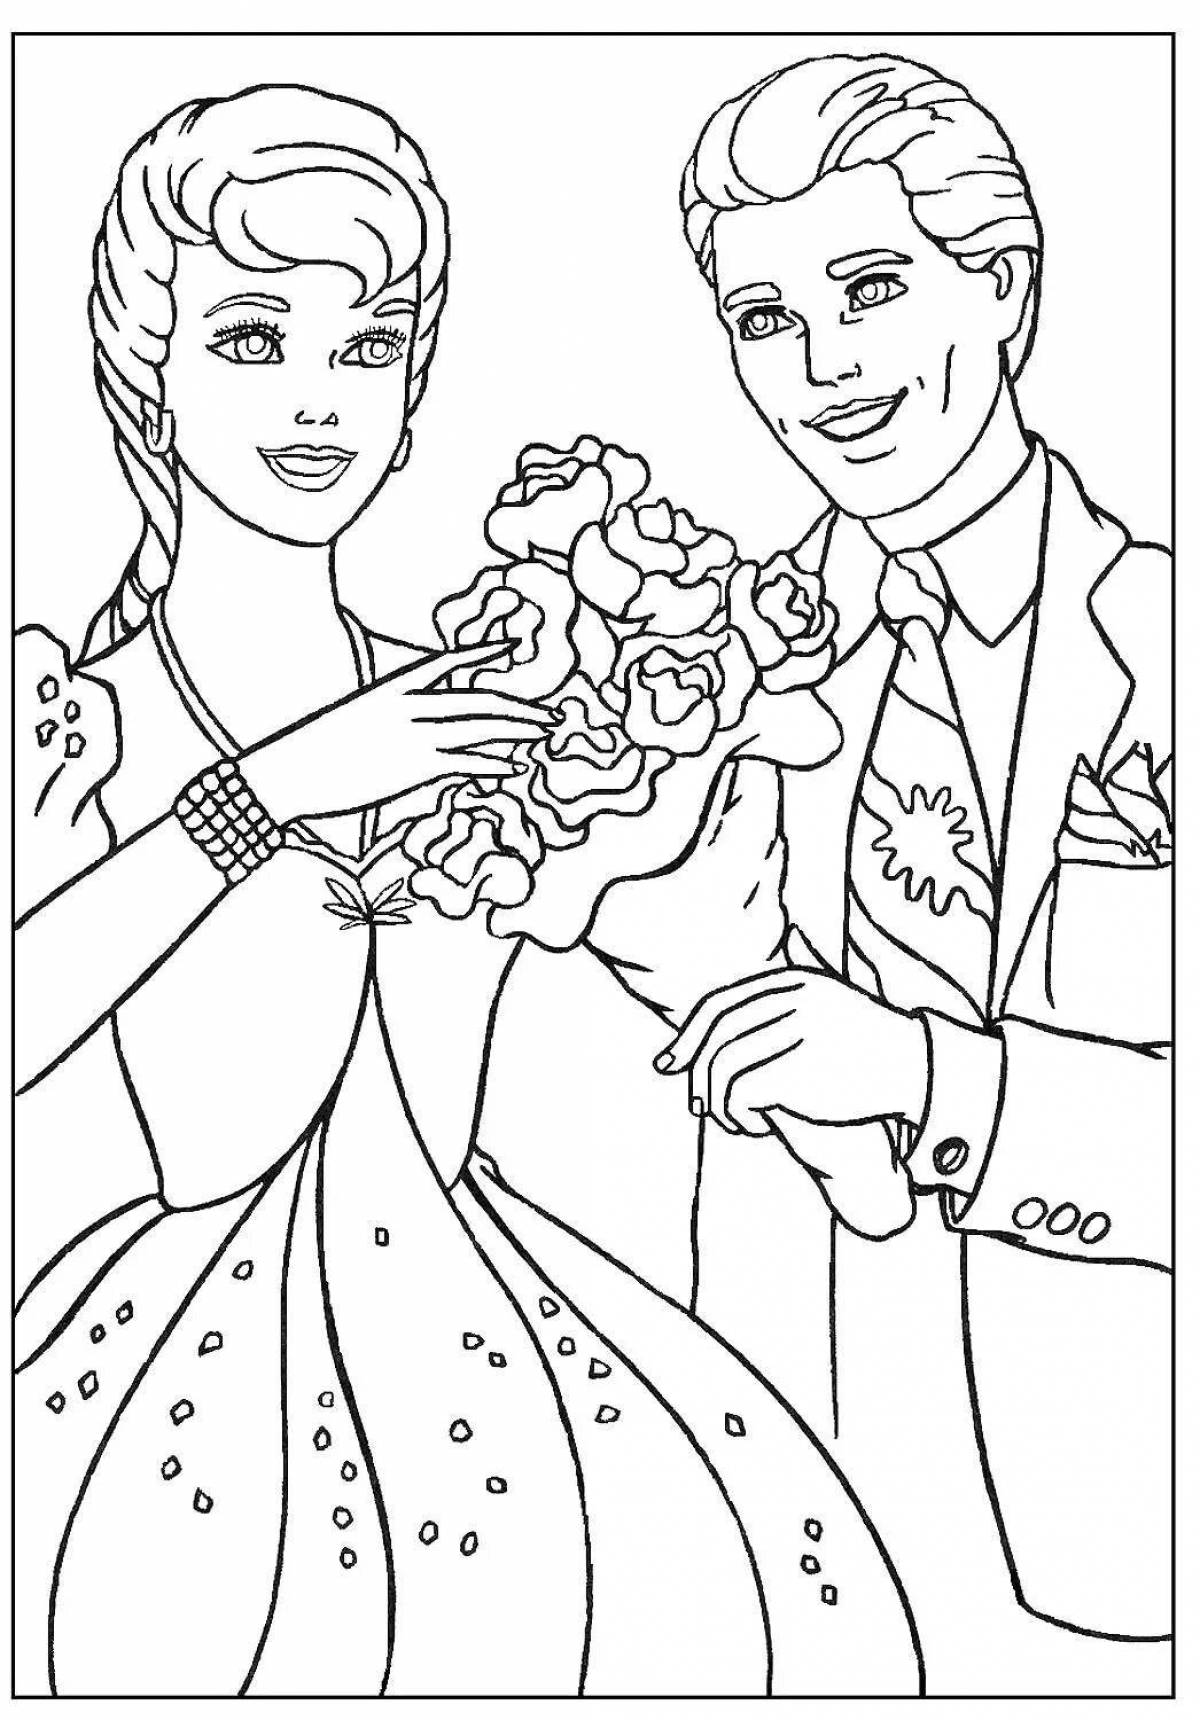 Playful coloring barbie and ken for girls